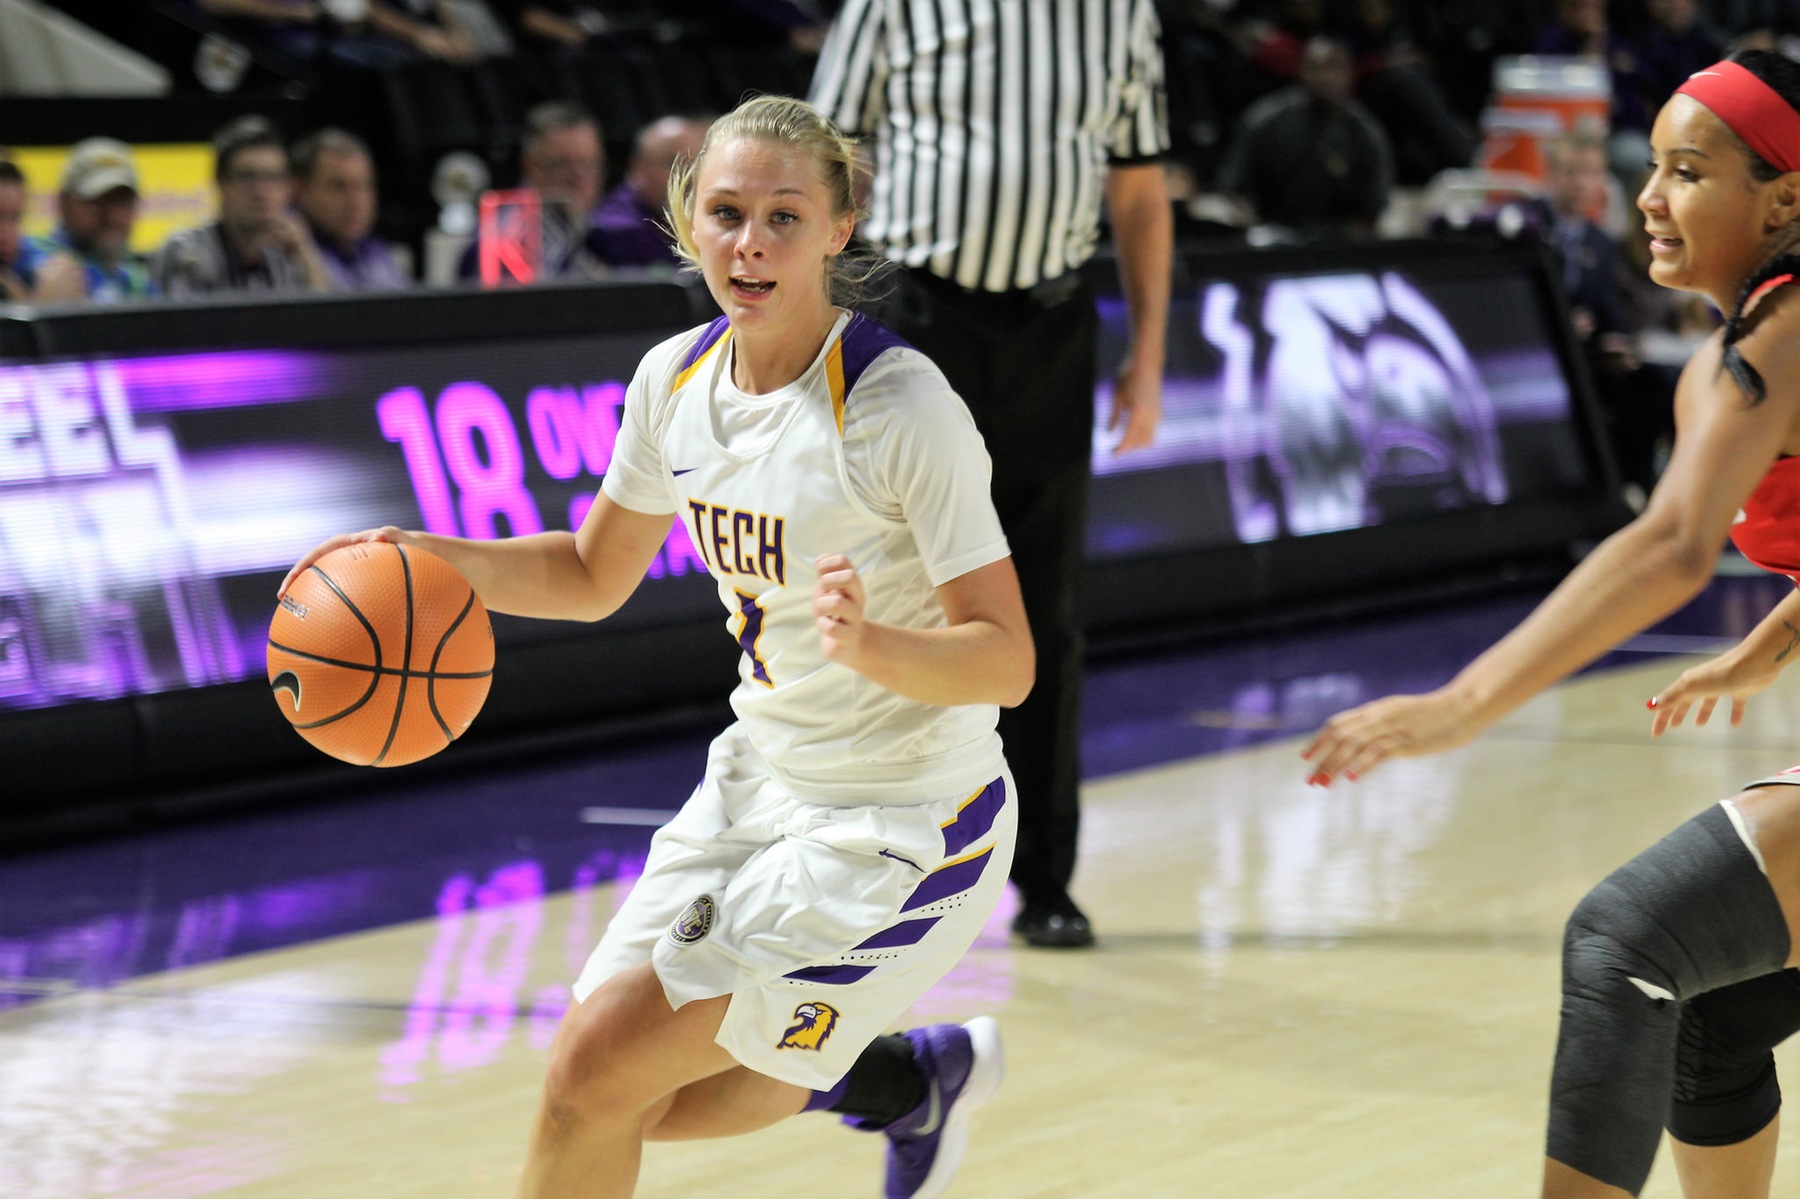 TTU women’s basketball to sharpen competitive edge in exhibition with Hiwassee College